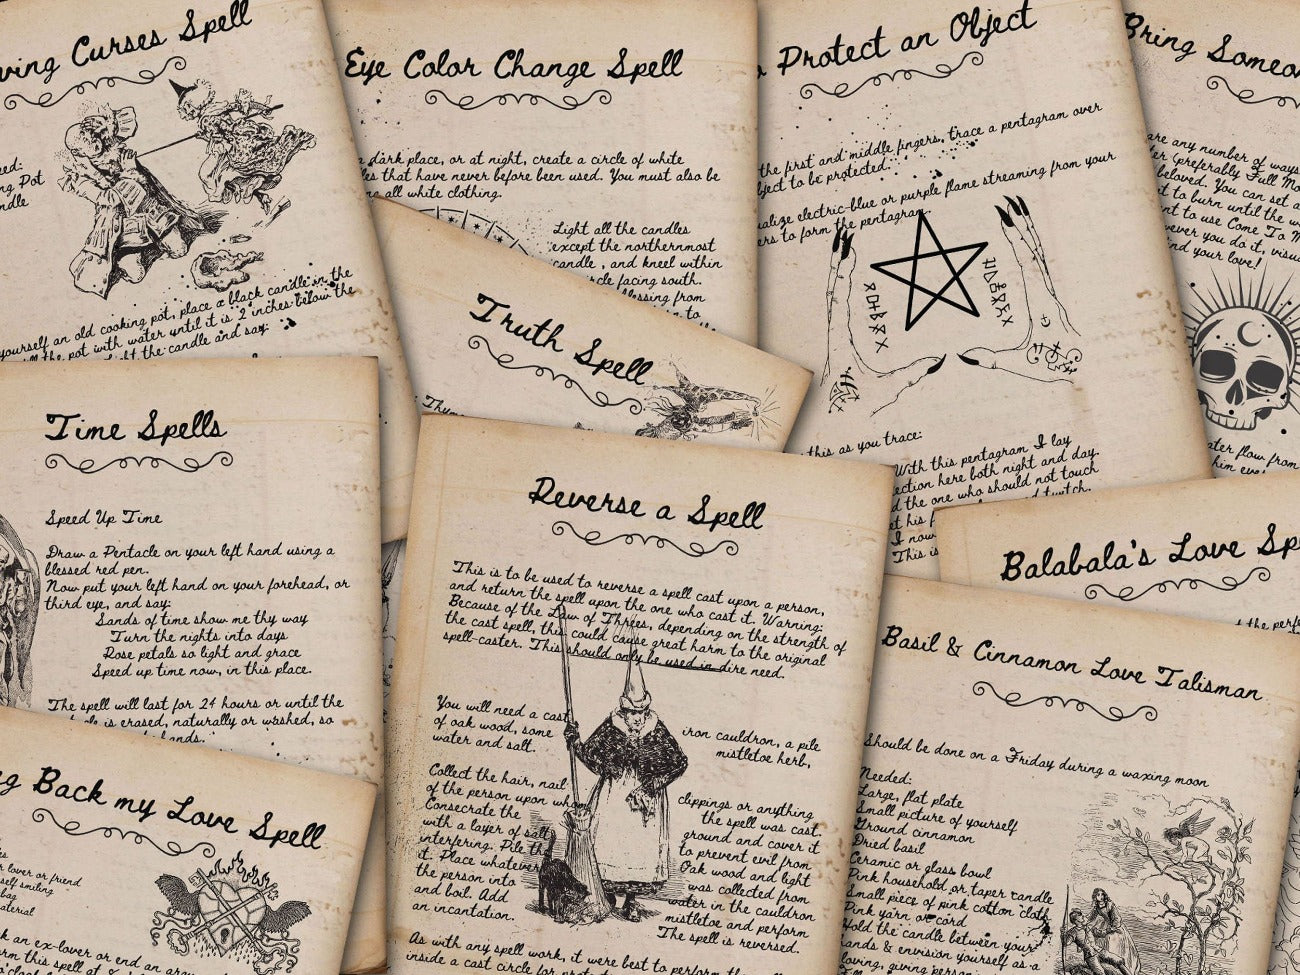 A sample of 10 of the spell pages in parchment.